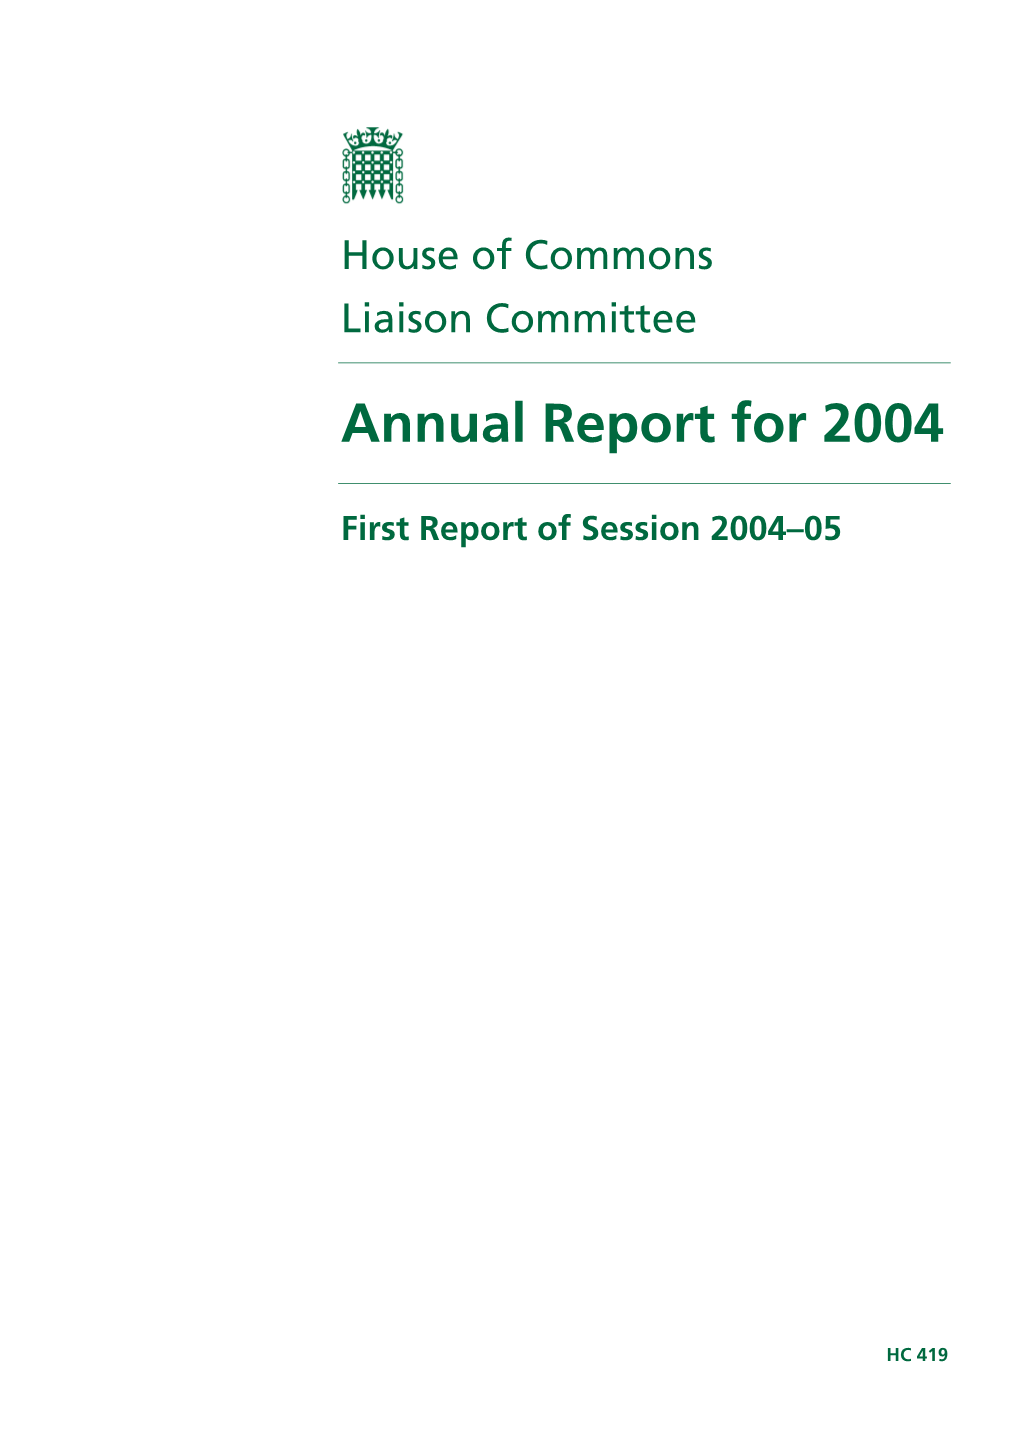 Annual Report for 2004